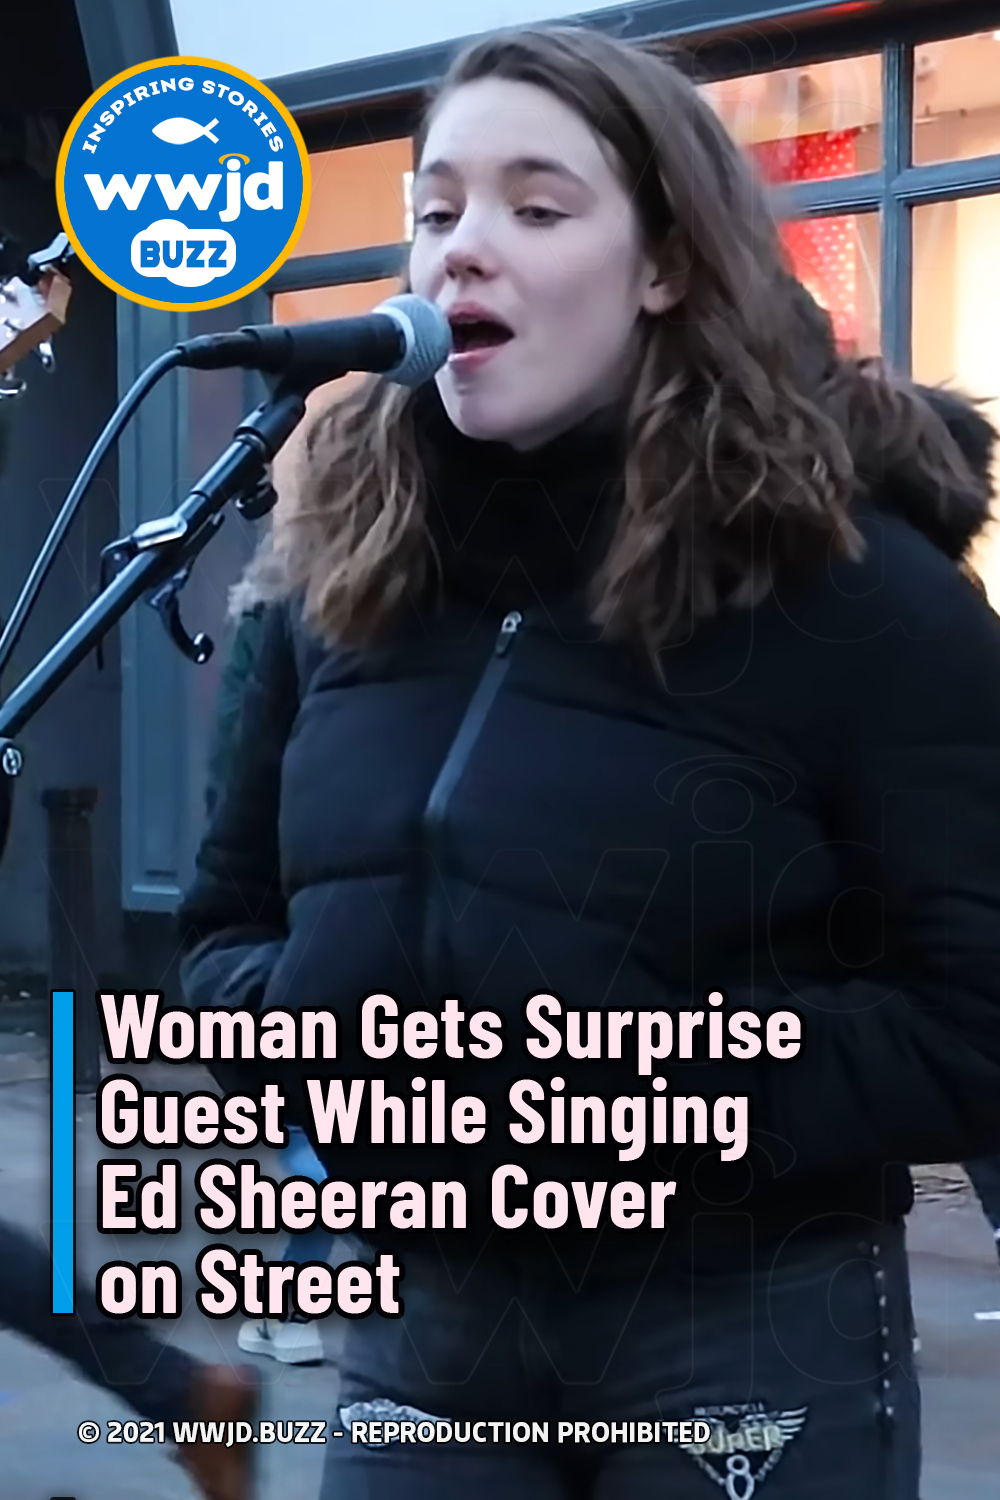 Woman Gets Surprise Guest While Singing Ed Sheeran Cover on Street